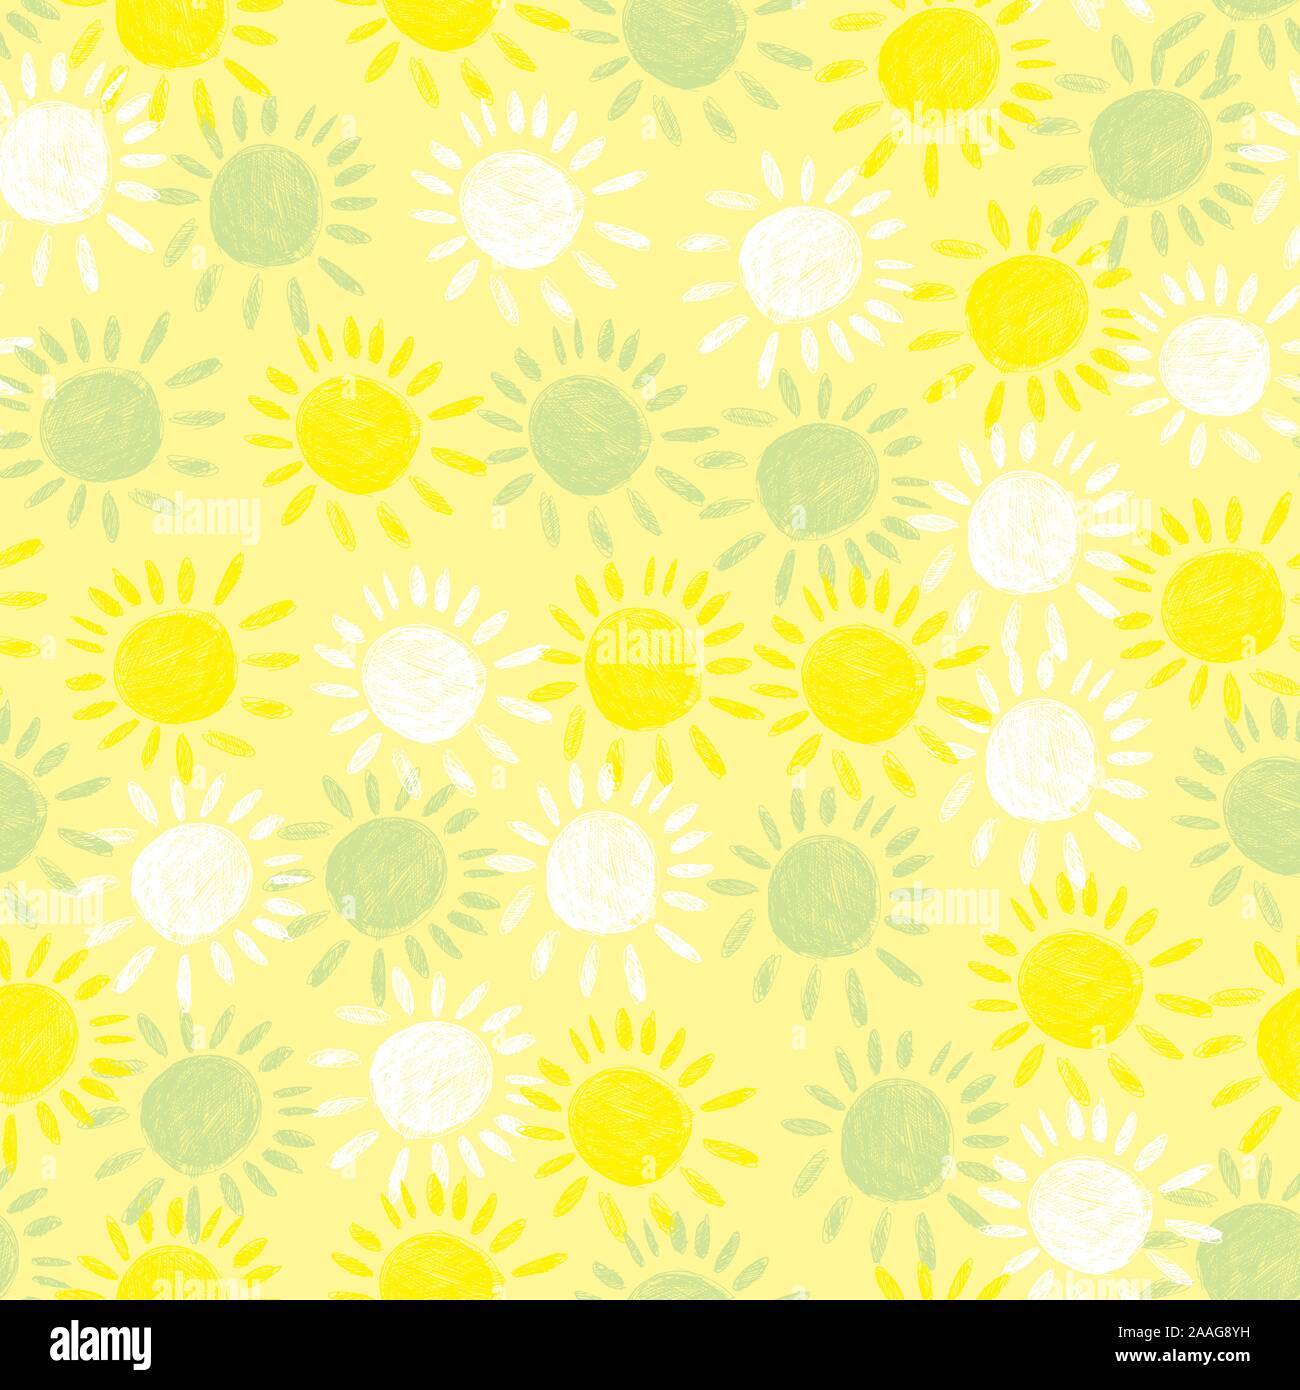 Vector soft yellow artistic sun print repeat pattern. Perfect for fabric, scrapbooking and wallpaper projects. Stock Vector